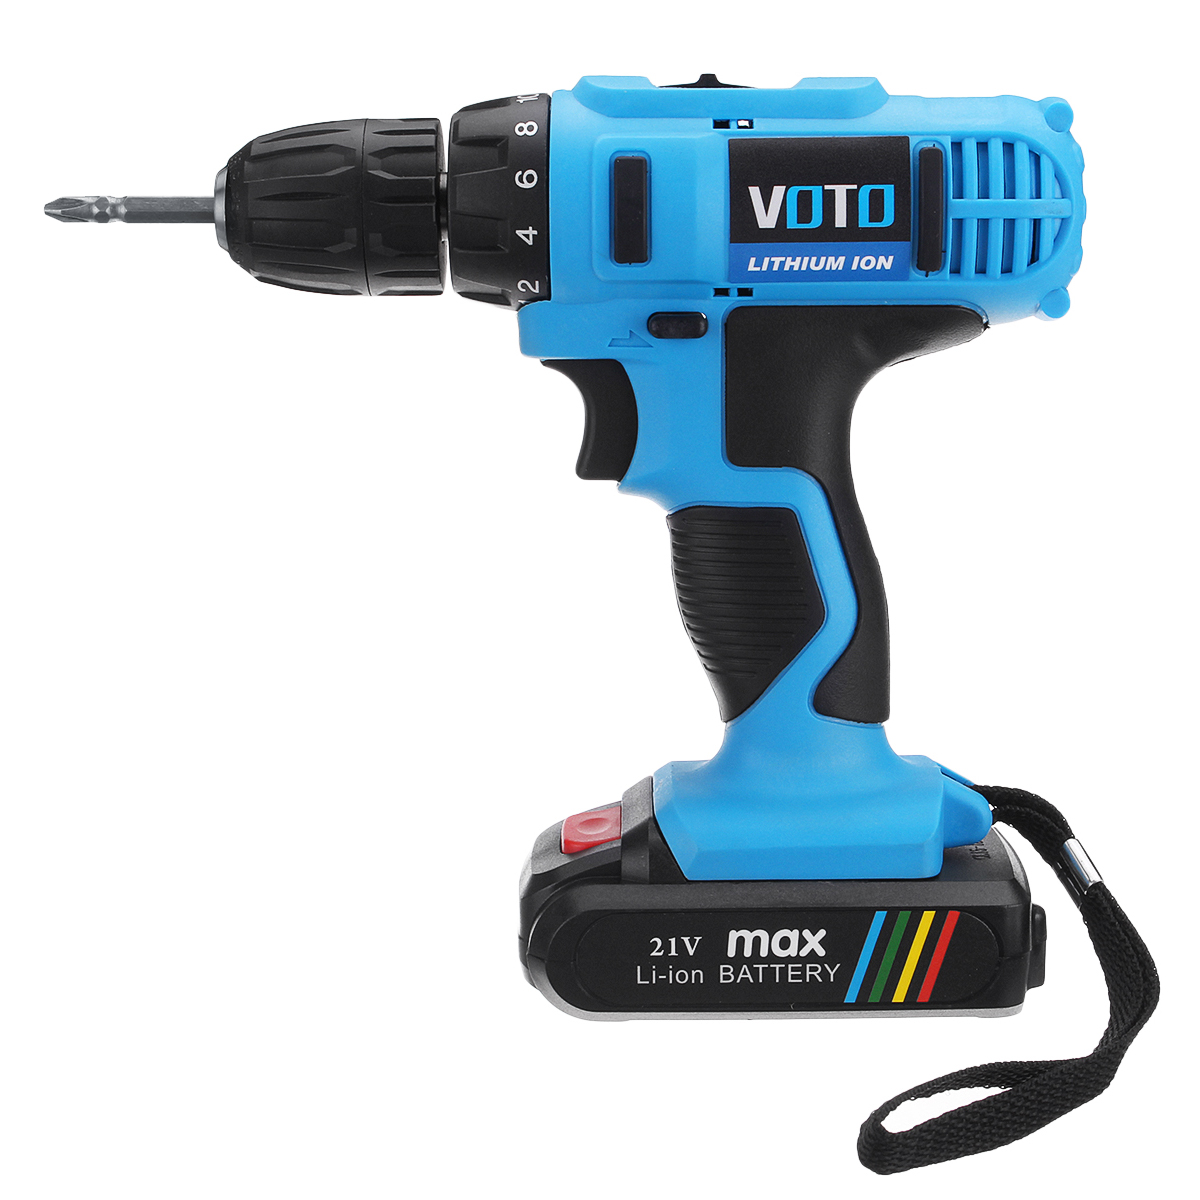 AC-110-220V-DC-21V-Lithium-Cordless-Rechargeable-Power-Drill-Electric-Screwdriver-Two-Speed-1305352-3